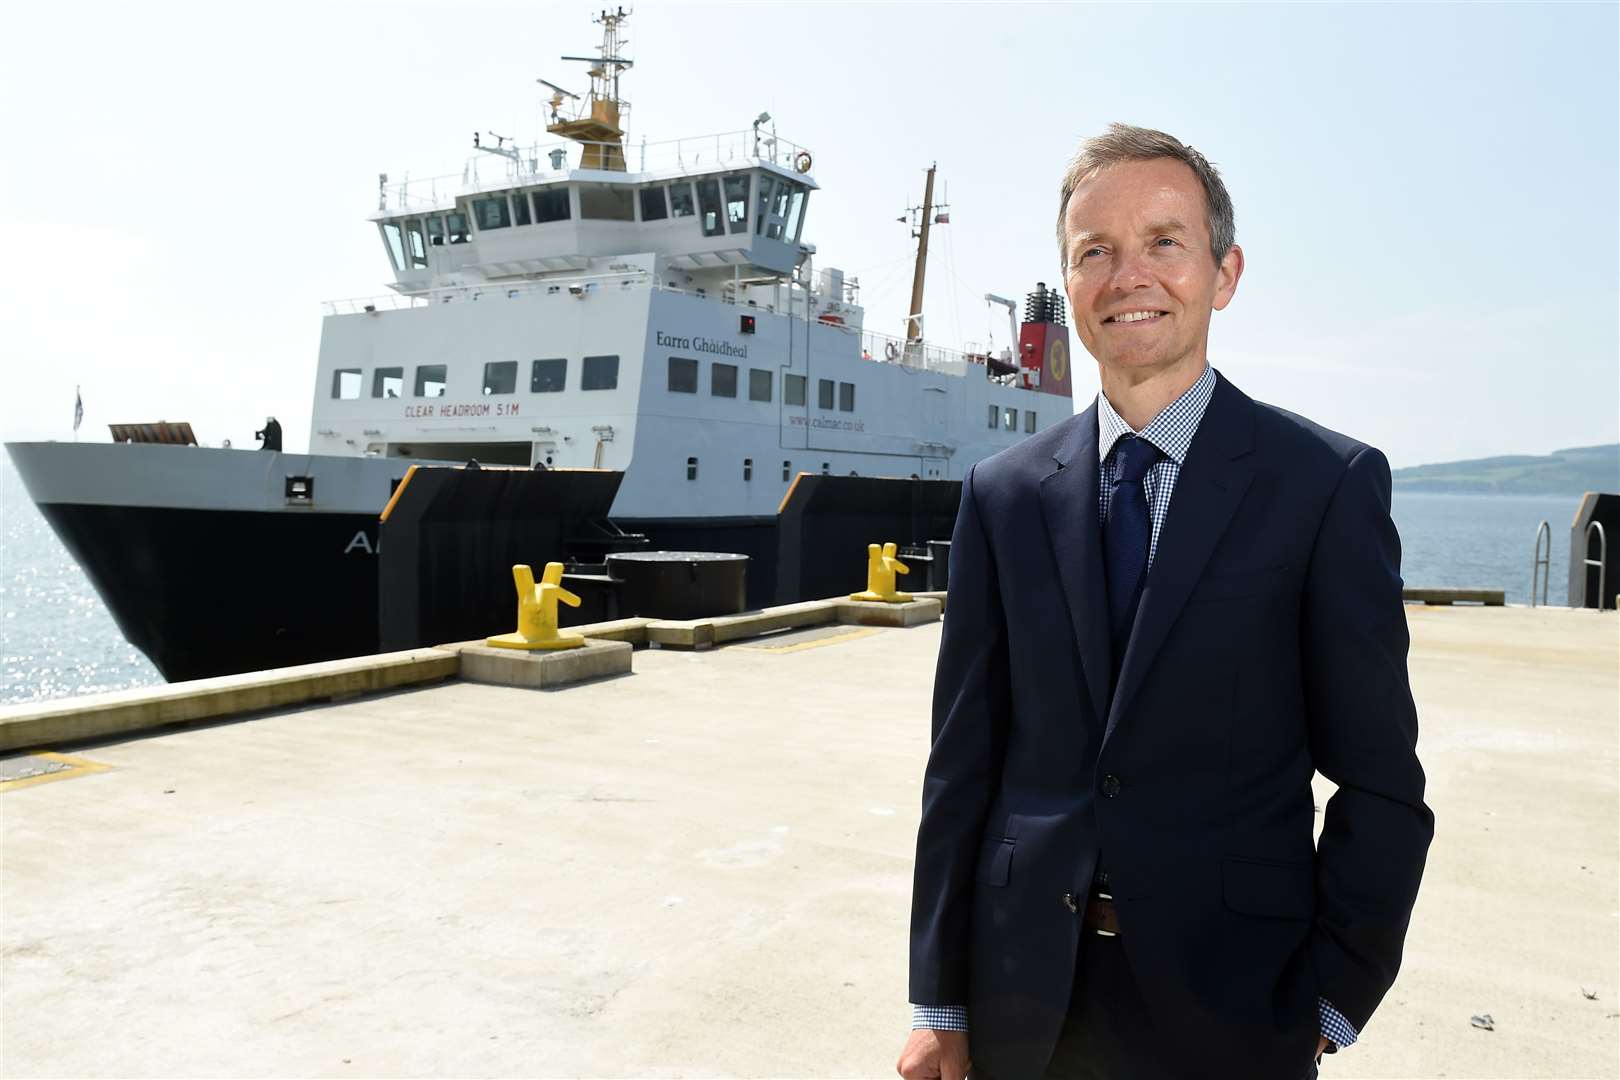 CalMac managing director Robbie Drummond: 'I am deeply sorry for what [customers] are going through. Moving them onto other routes is far from ideal but without a spare vessel, this is the best option we have available.'